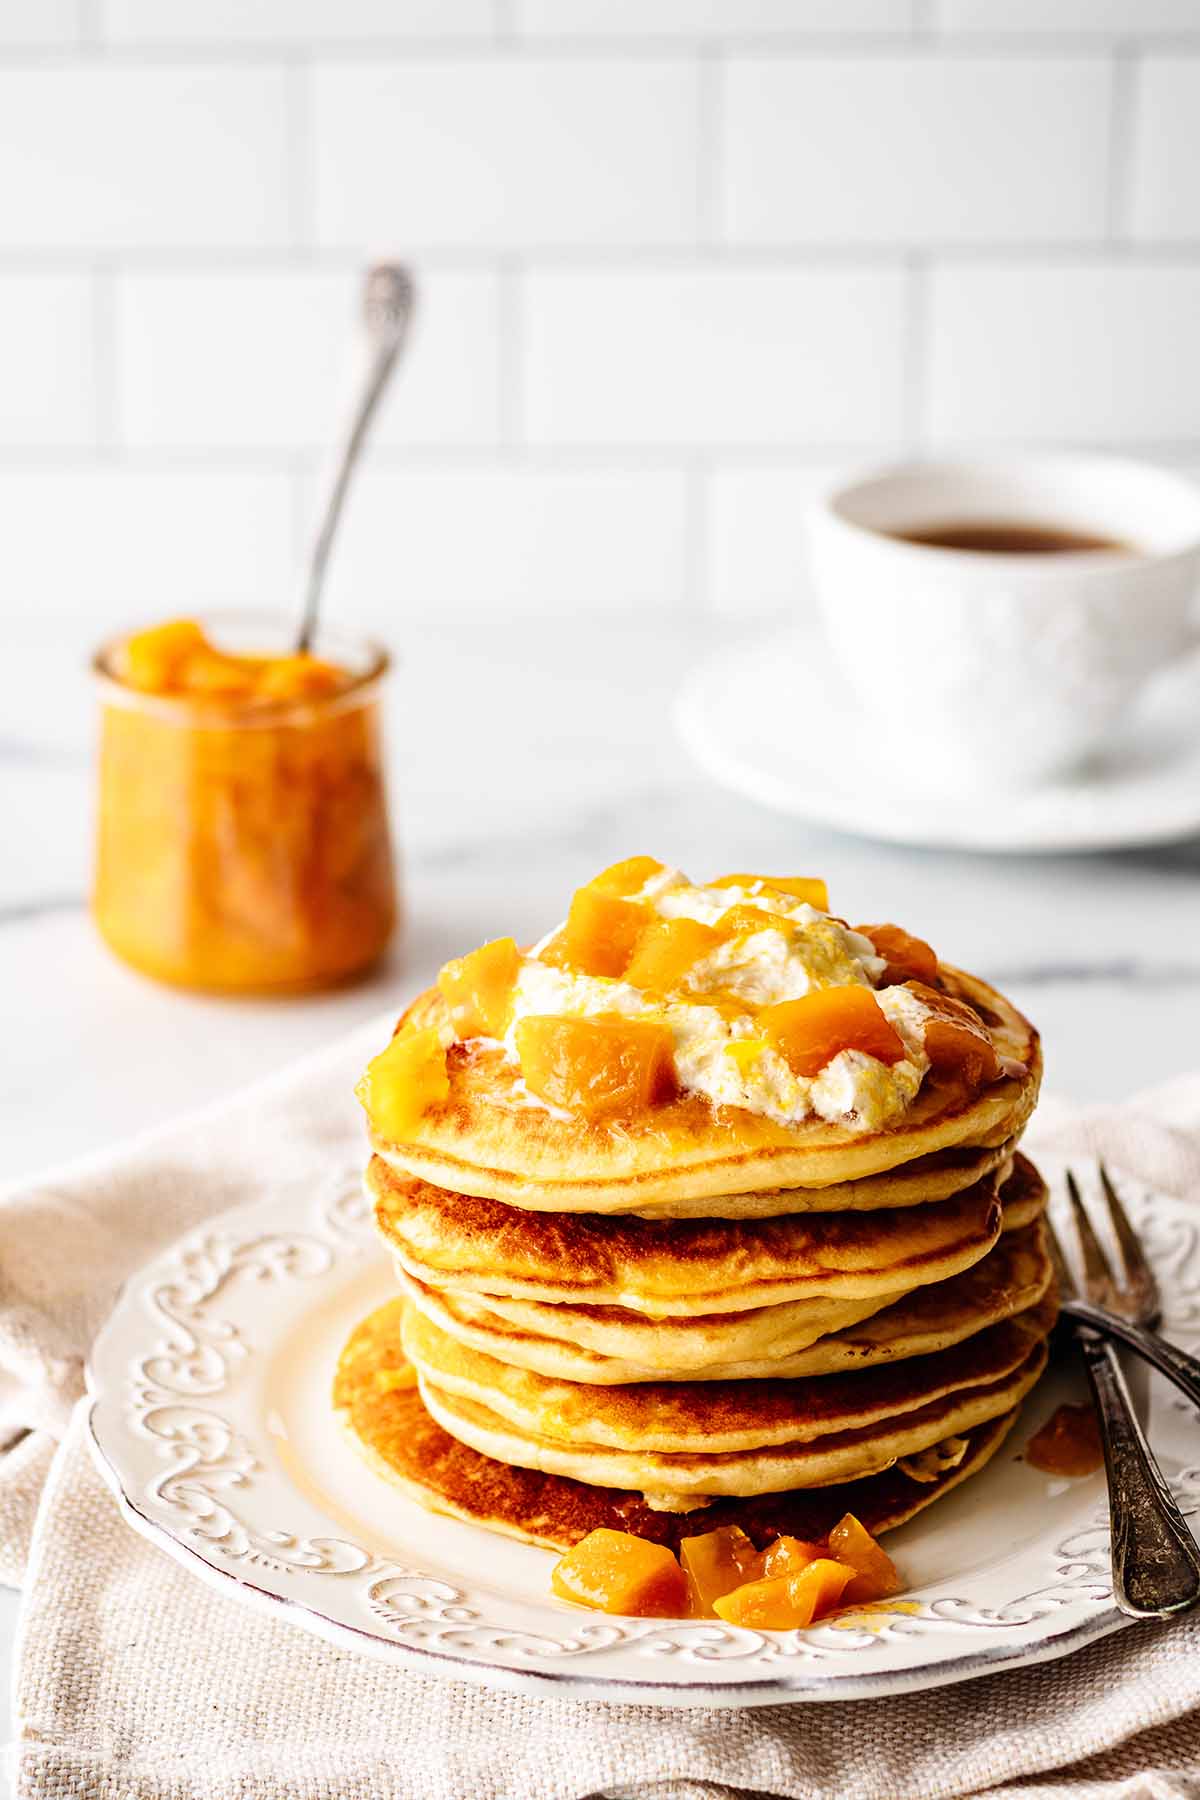 Stack of pancakes topped with whipped cream and mango compote on a white plate with two forks. A jar of fresh mango compote and hot tea in a white teacup with saucer are in the background.